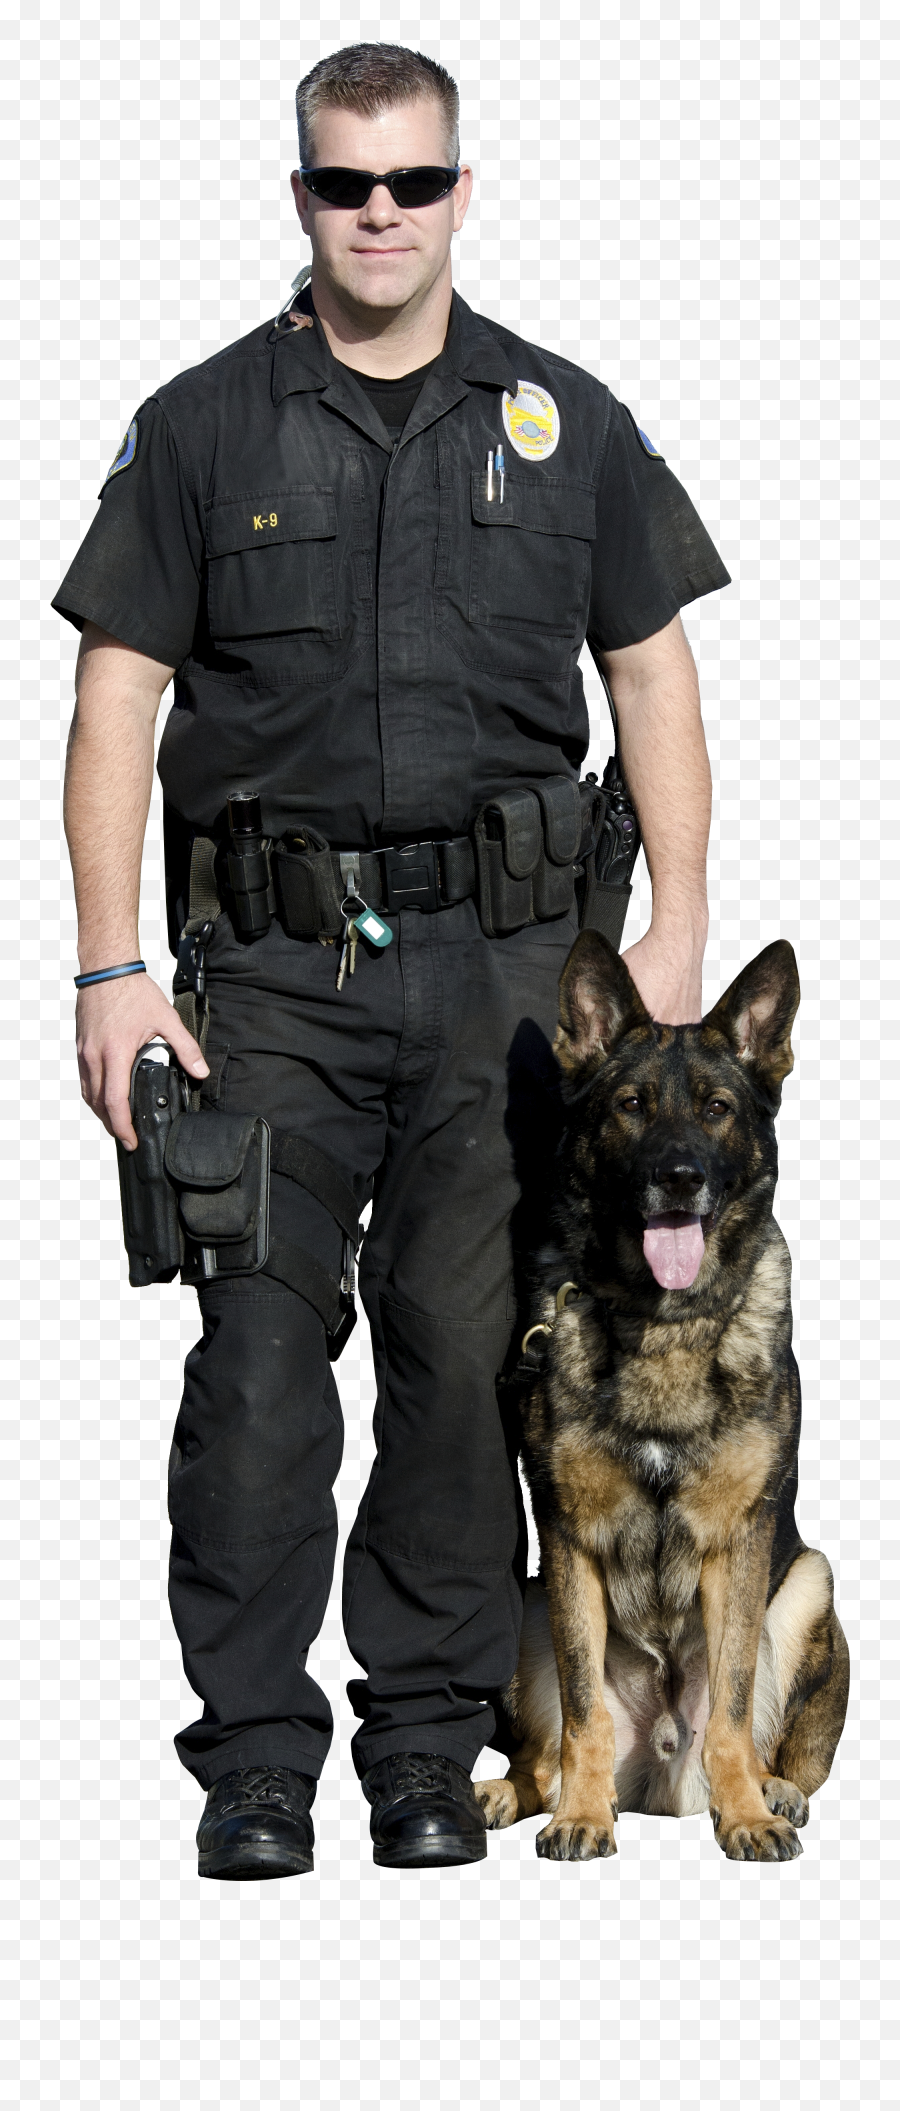 Cycle Cop Png Image With No Background - Cop Transparent Background,Cop Png